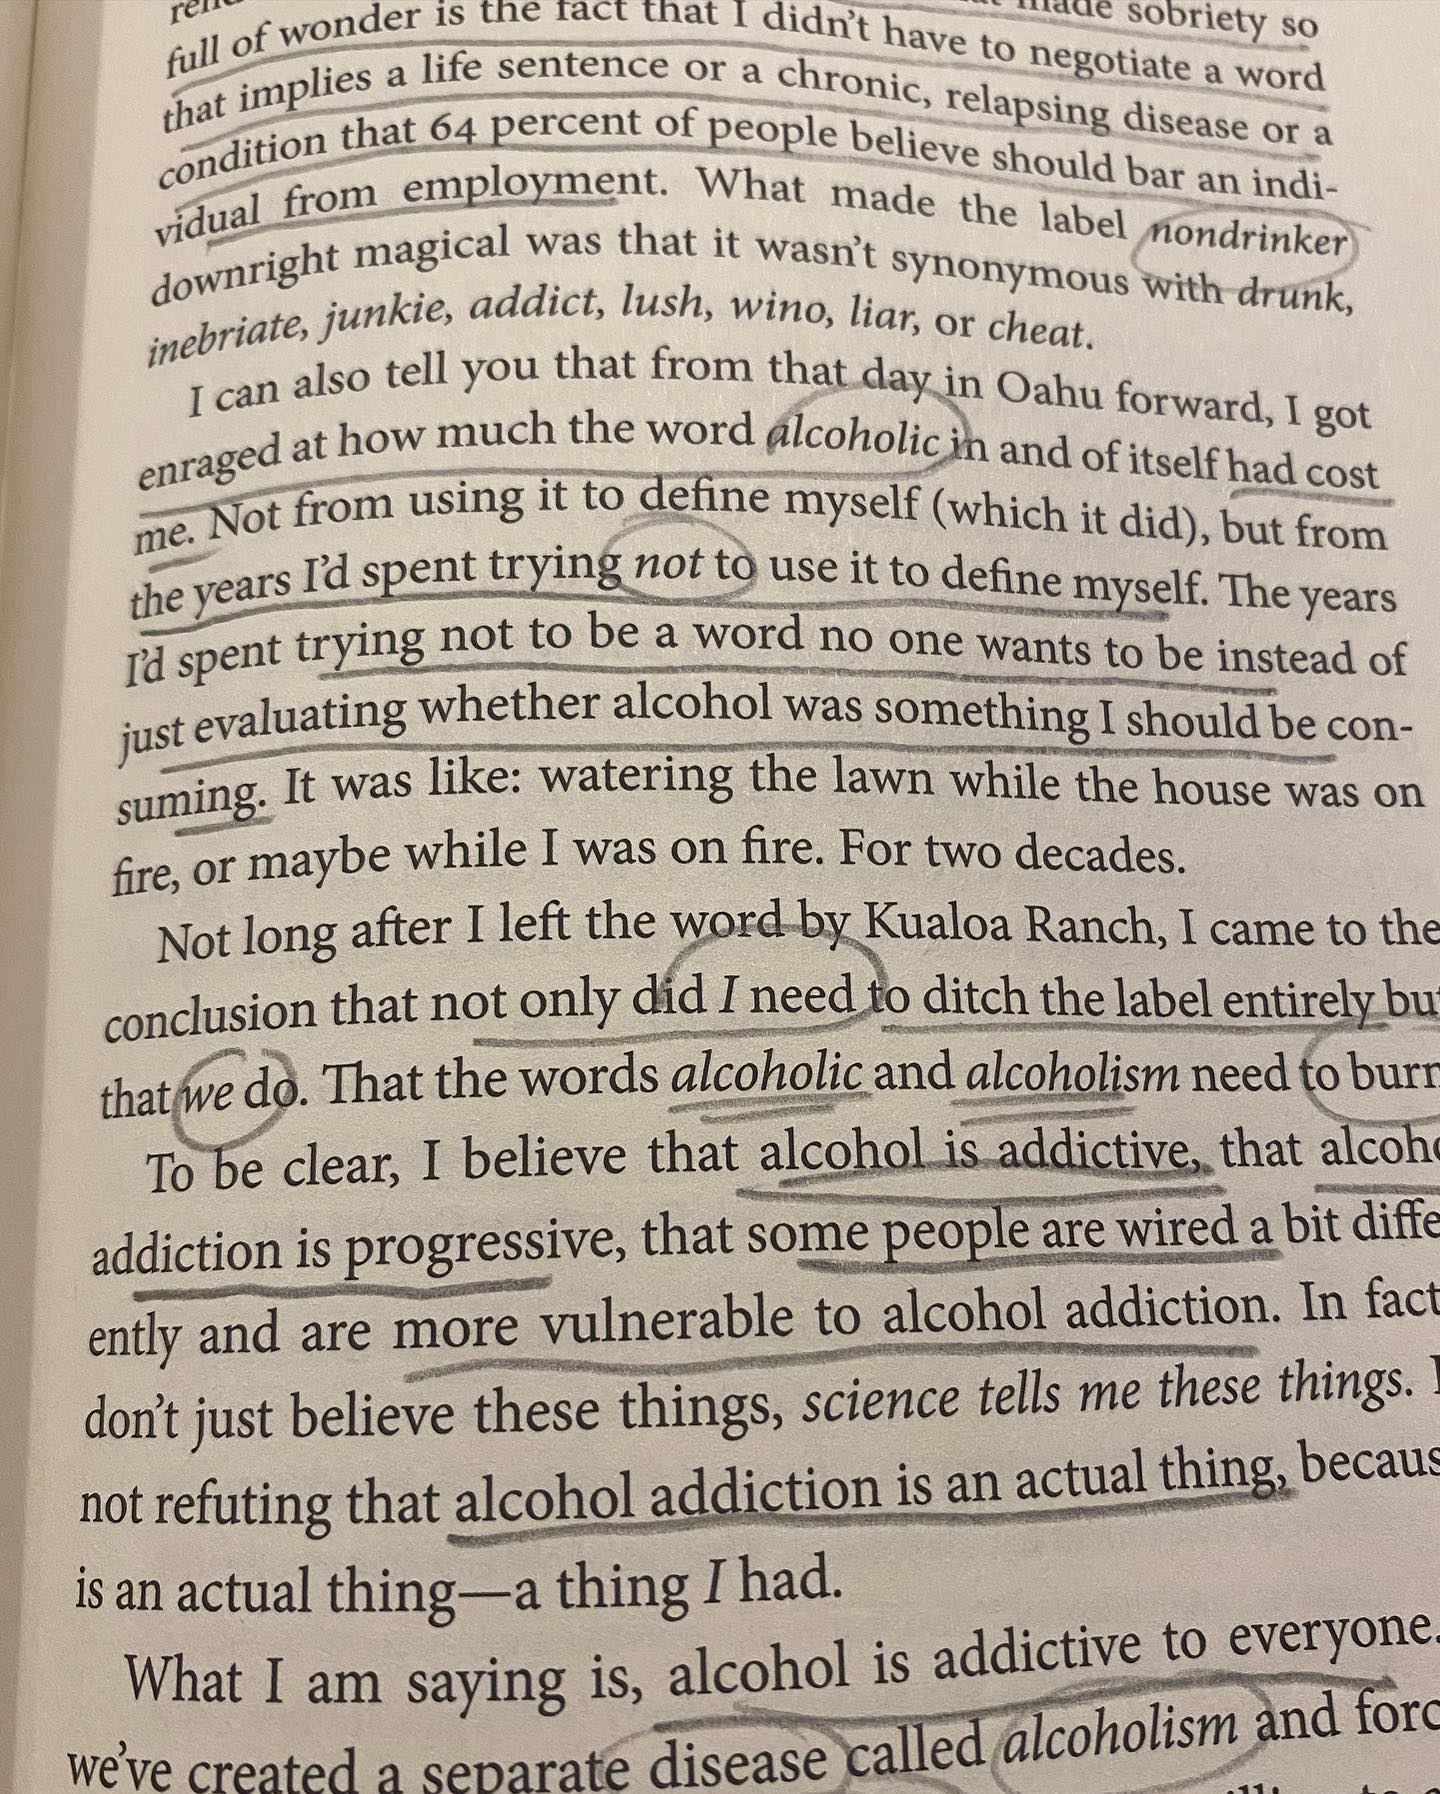 In Quit Like A Woman, author Holly Whitaker rejects the idea of being an alcoholic and the term alcoholism. The substance of alcohol itself is addictive and the label alcoholic places the blame on the person who has become addicted to an addictive substance.